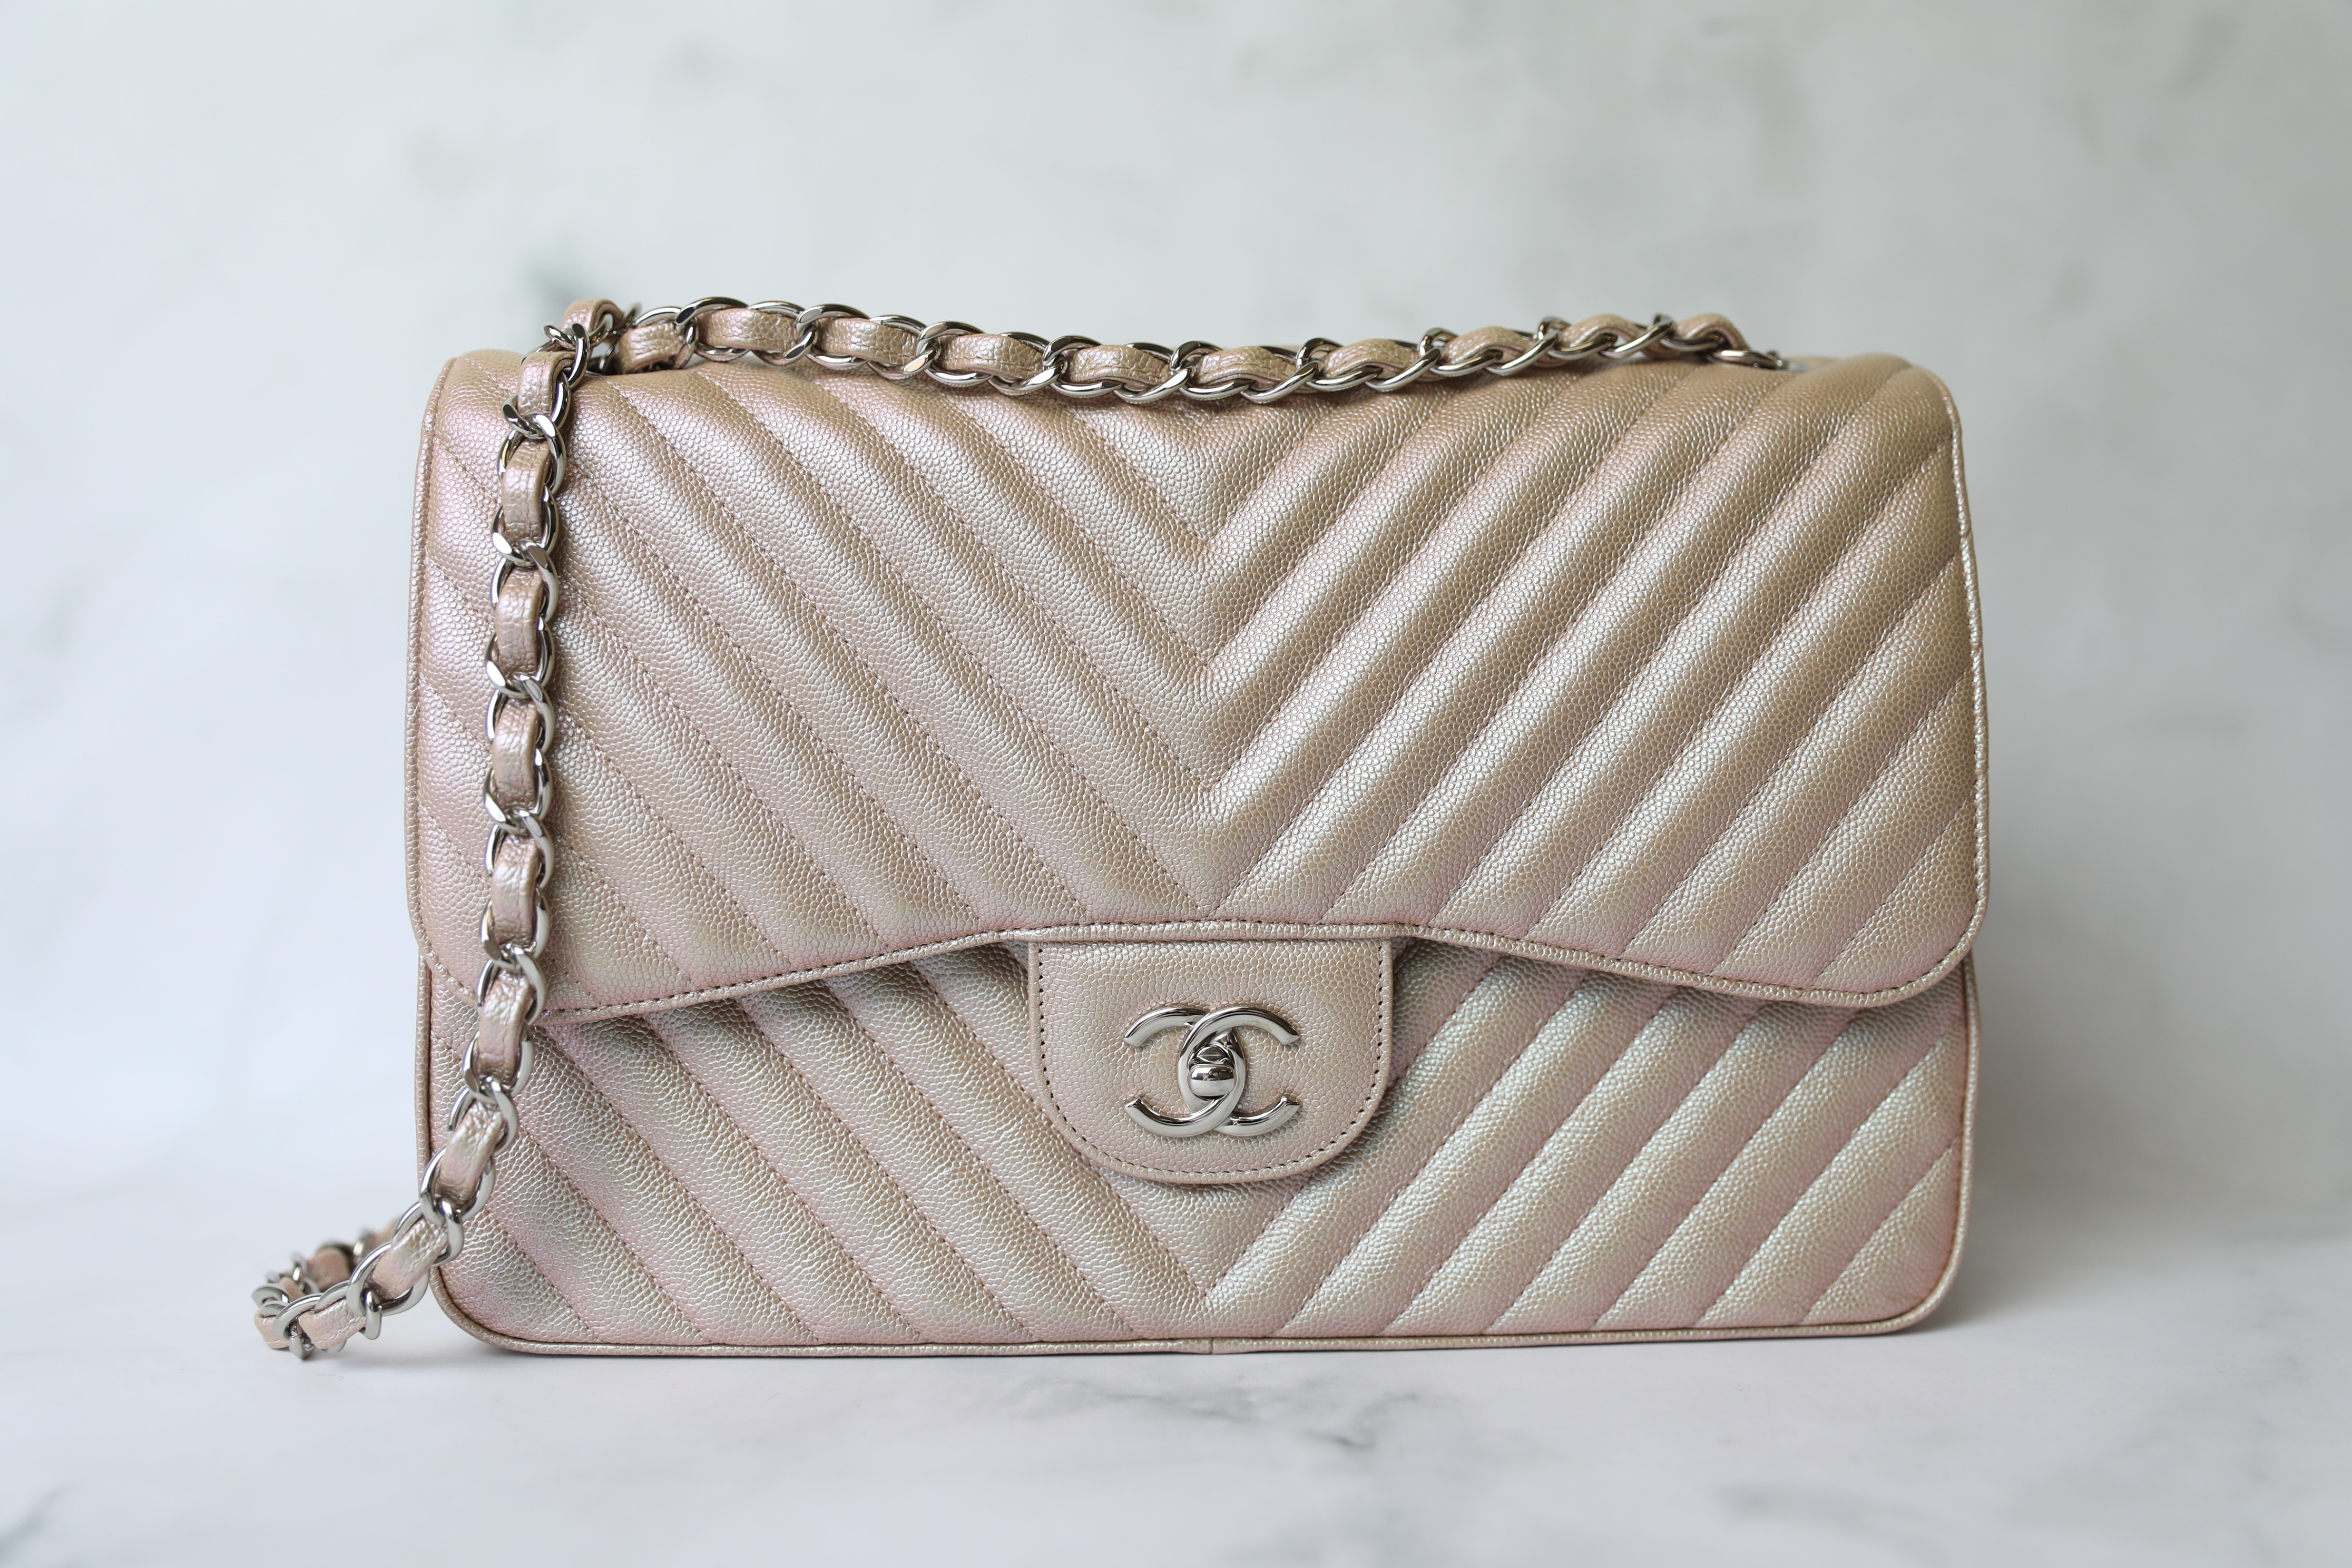 Chanel Classic Jumbo, 17B Rose Gold Caviar with Silver Hardware